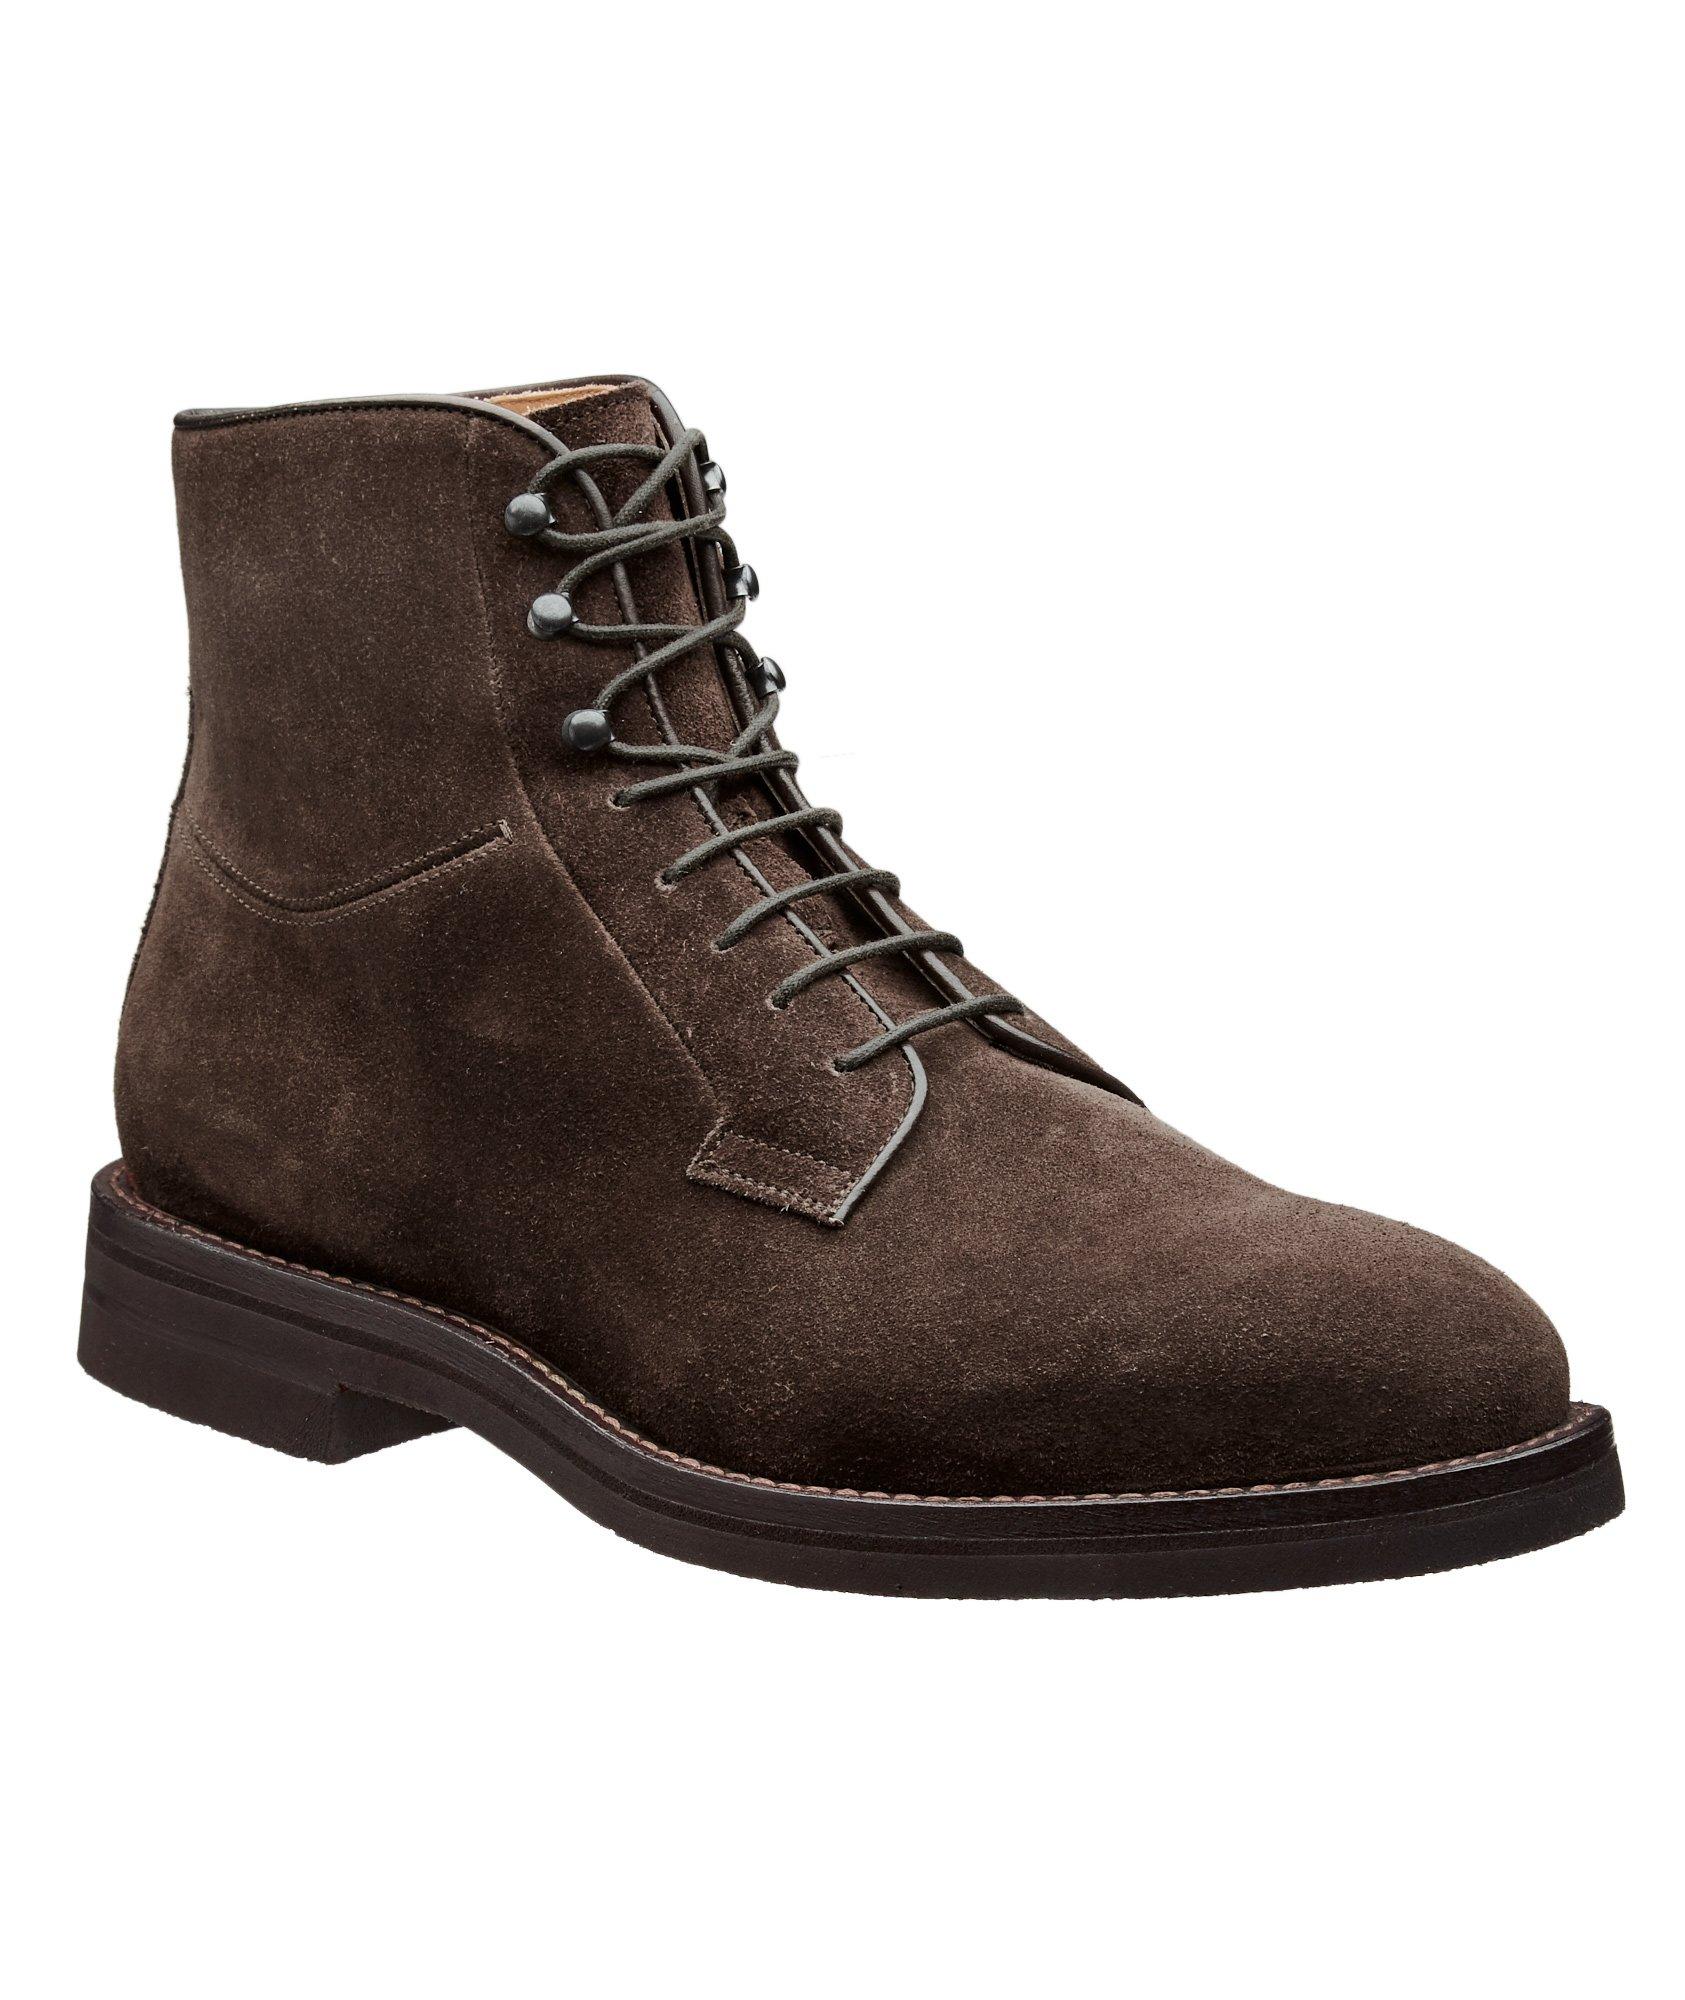 Suede Lace-Up Boots image 0